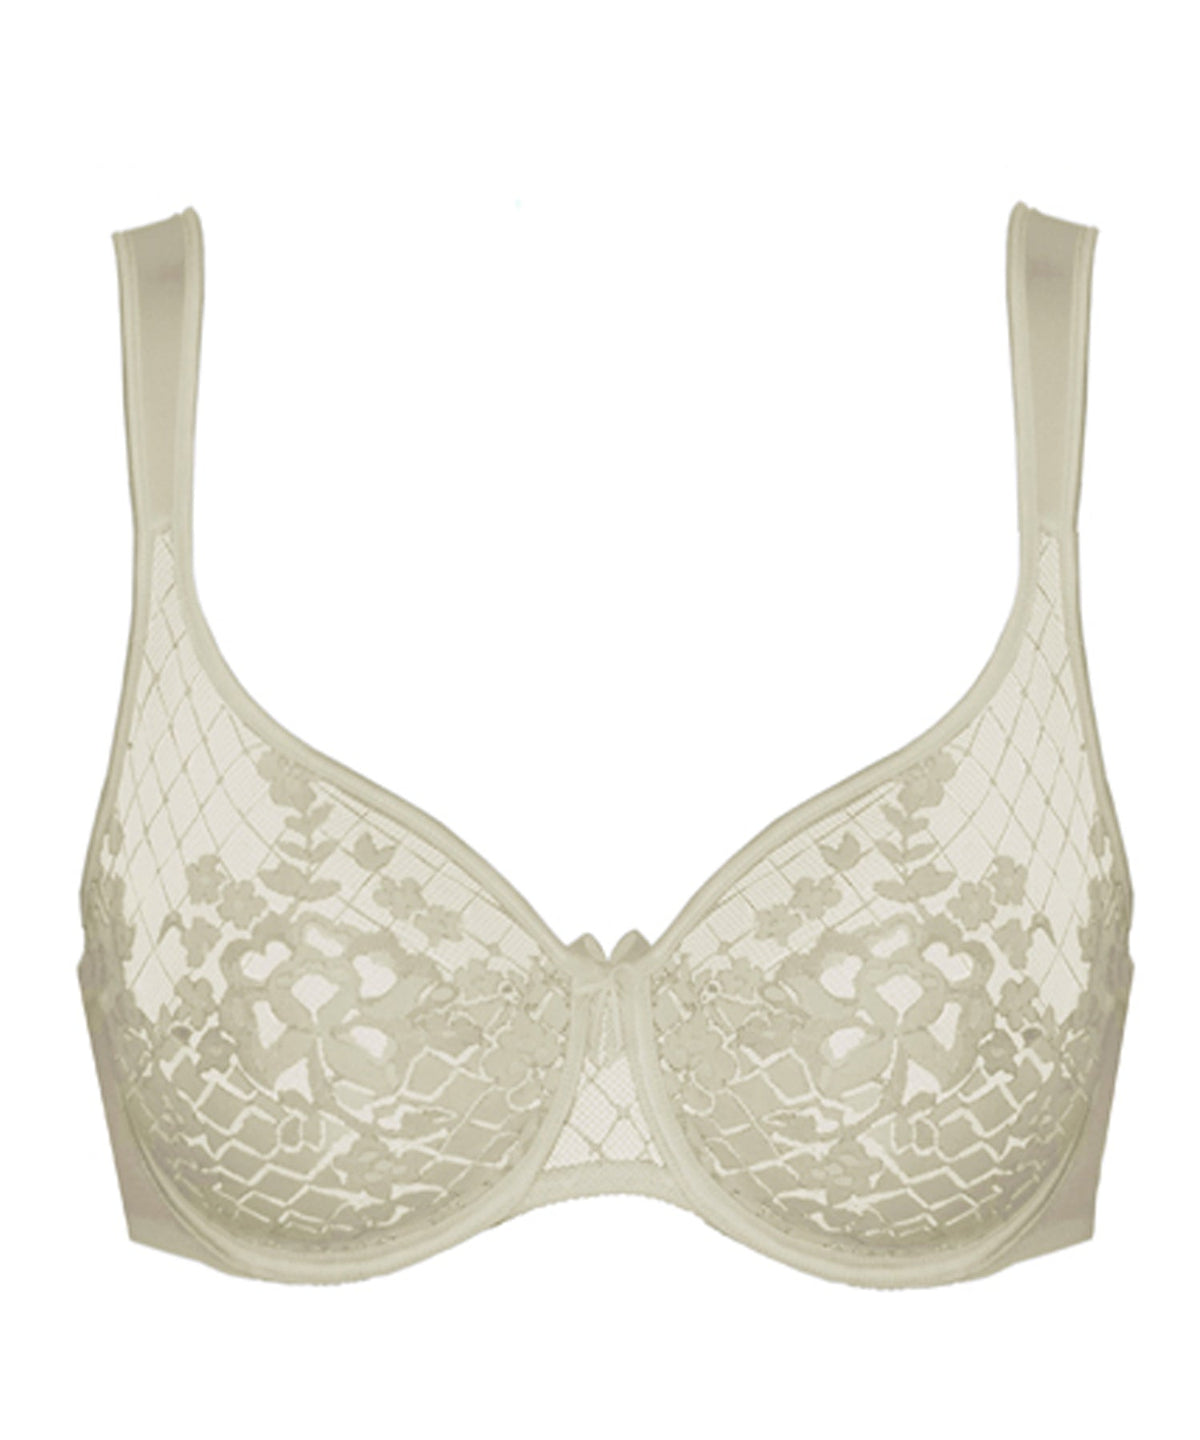 Empreinte Melody Seamless Lace Bra Review: French Luxury to an H Cup